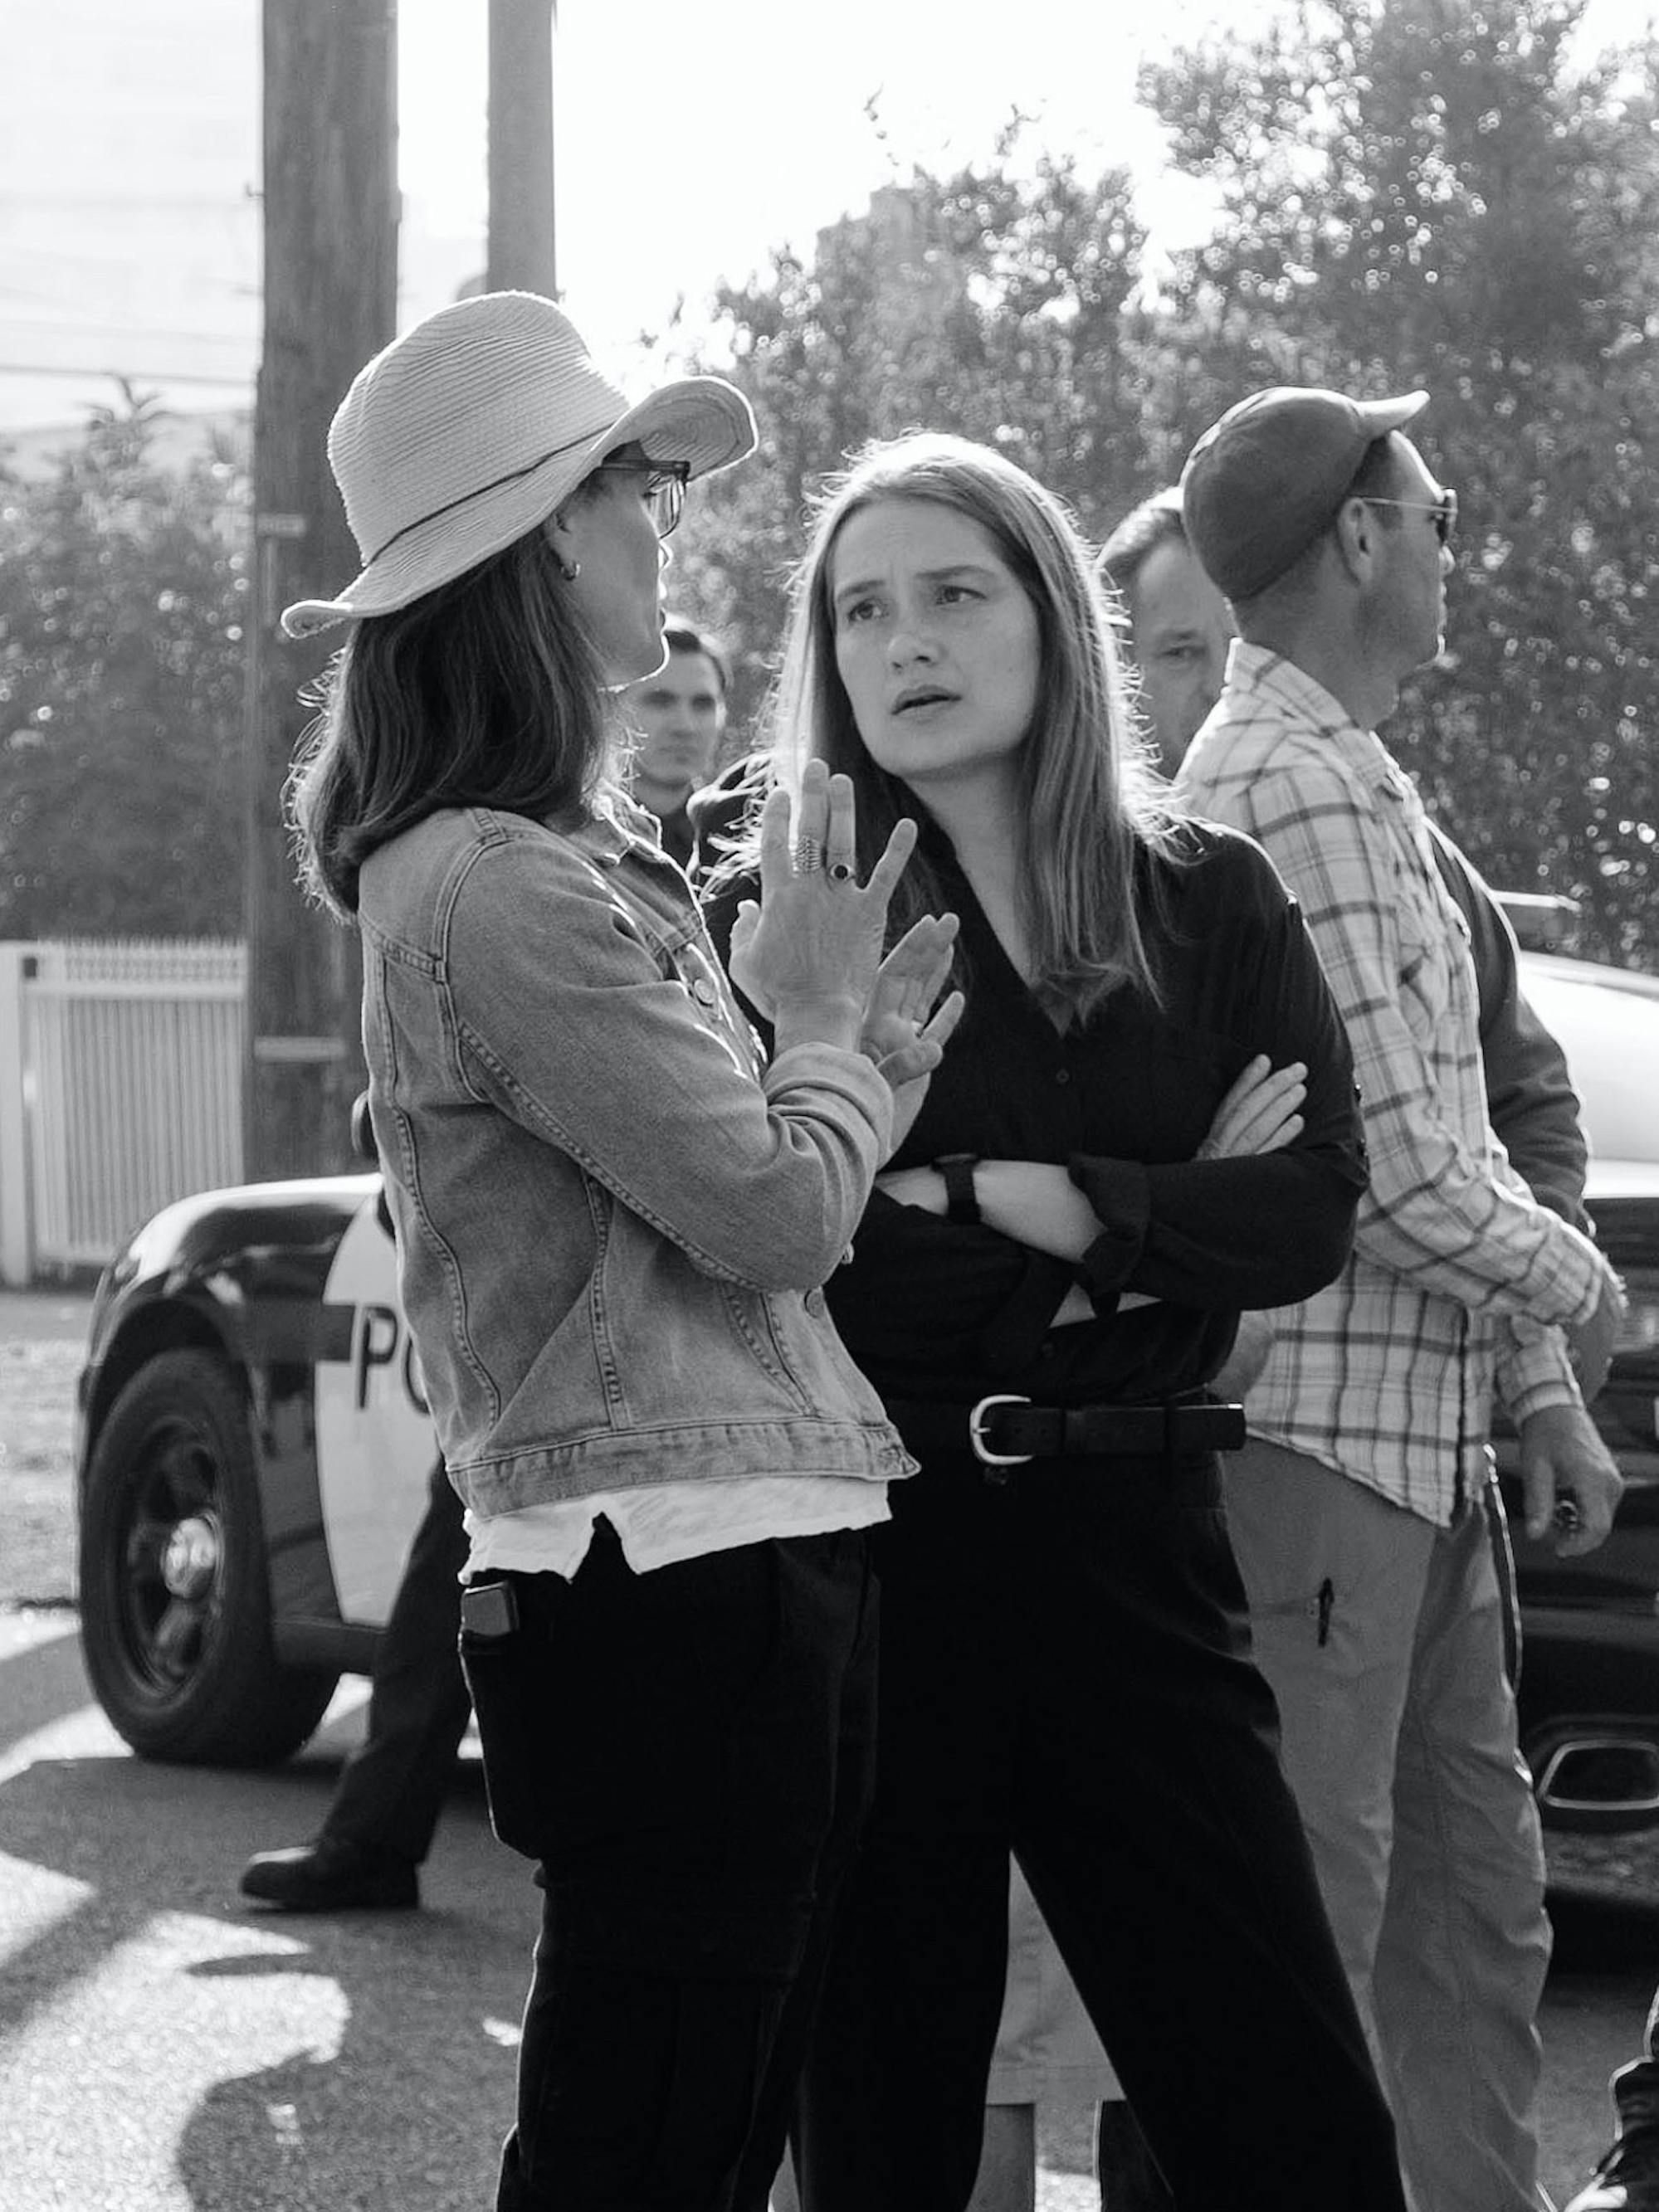 Susannah Grant and Merritt Wever stand near police cars in this black-and-white shot.